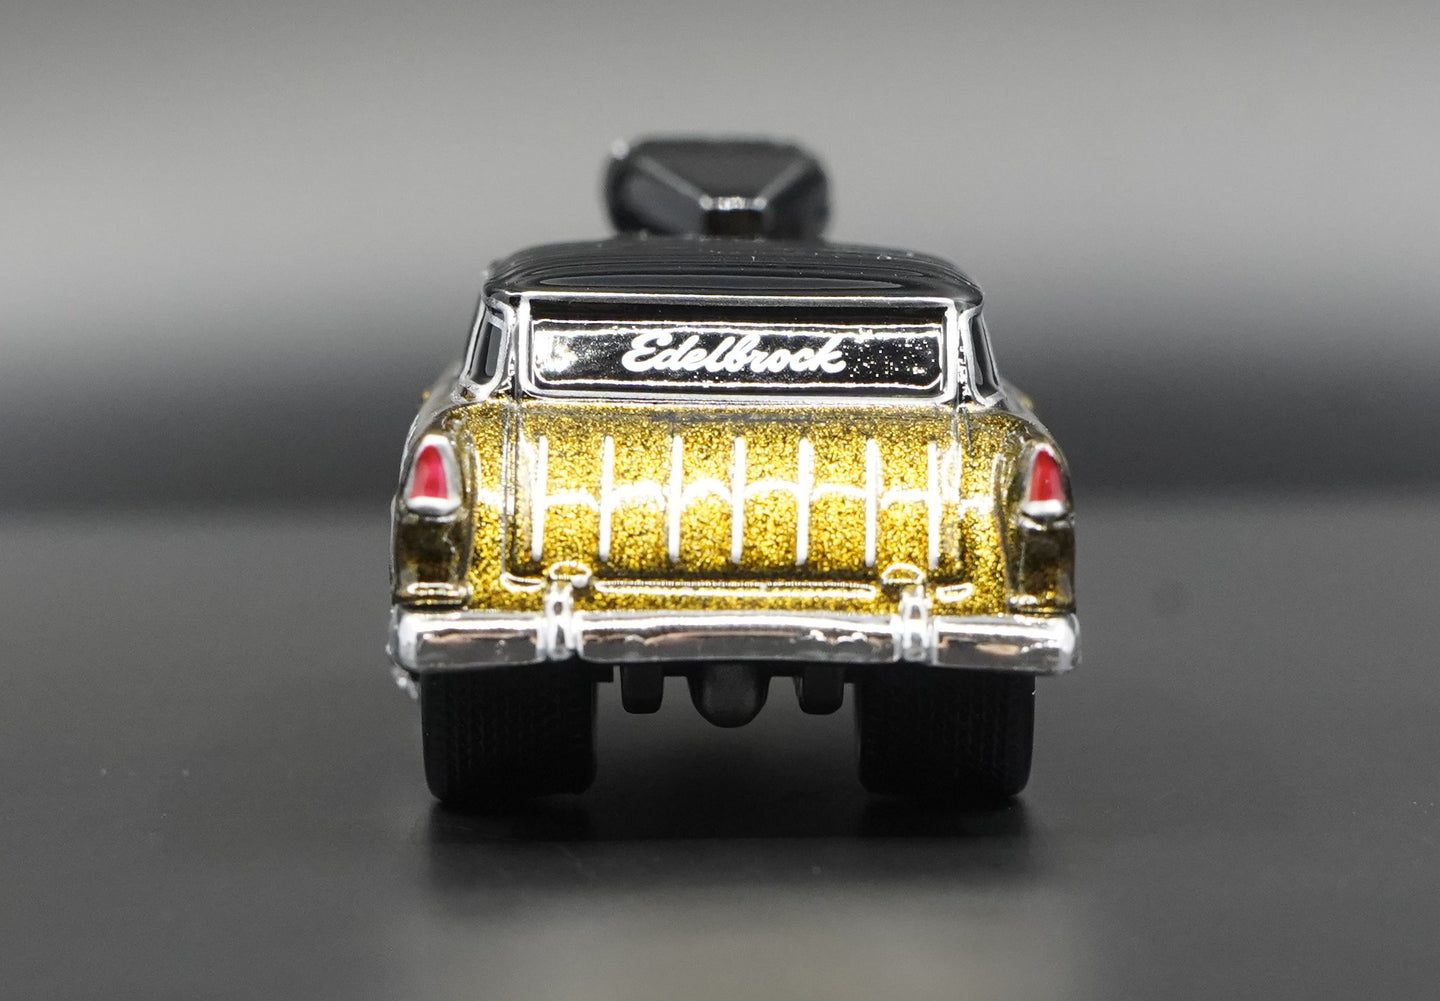 1955 Chevy Nomad Gasser Alloy Diecast Car Model 1:64 By Maisto - Muscle Machines